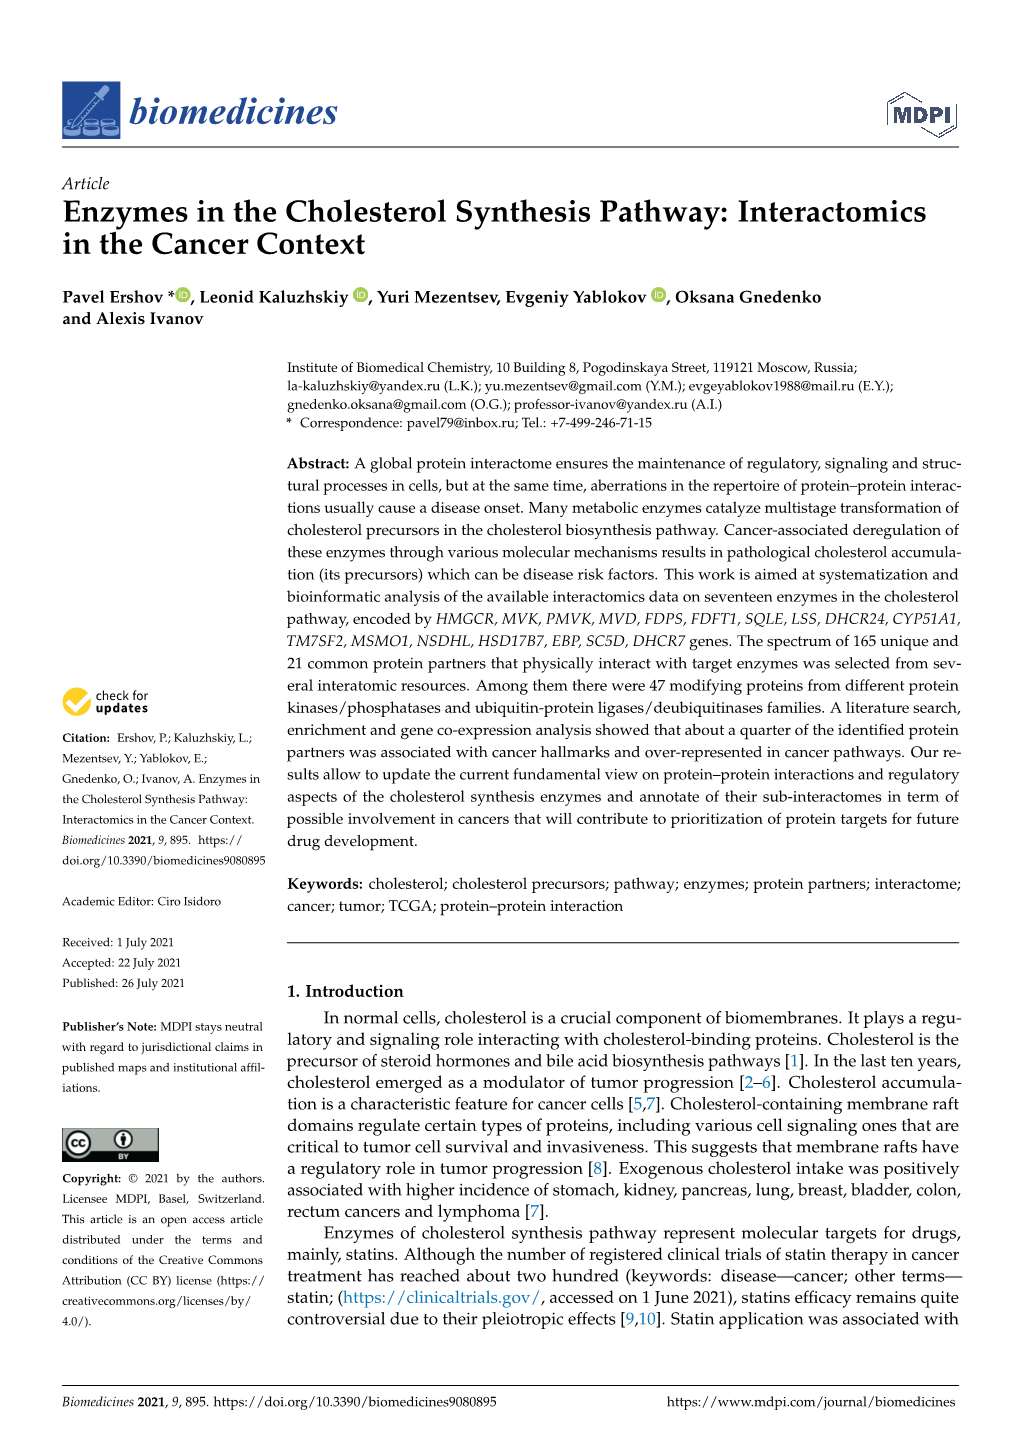 Enzymes in the Cholesterol Synthesis Pathway: Interactomics in the Cancer Context